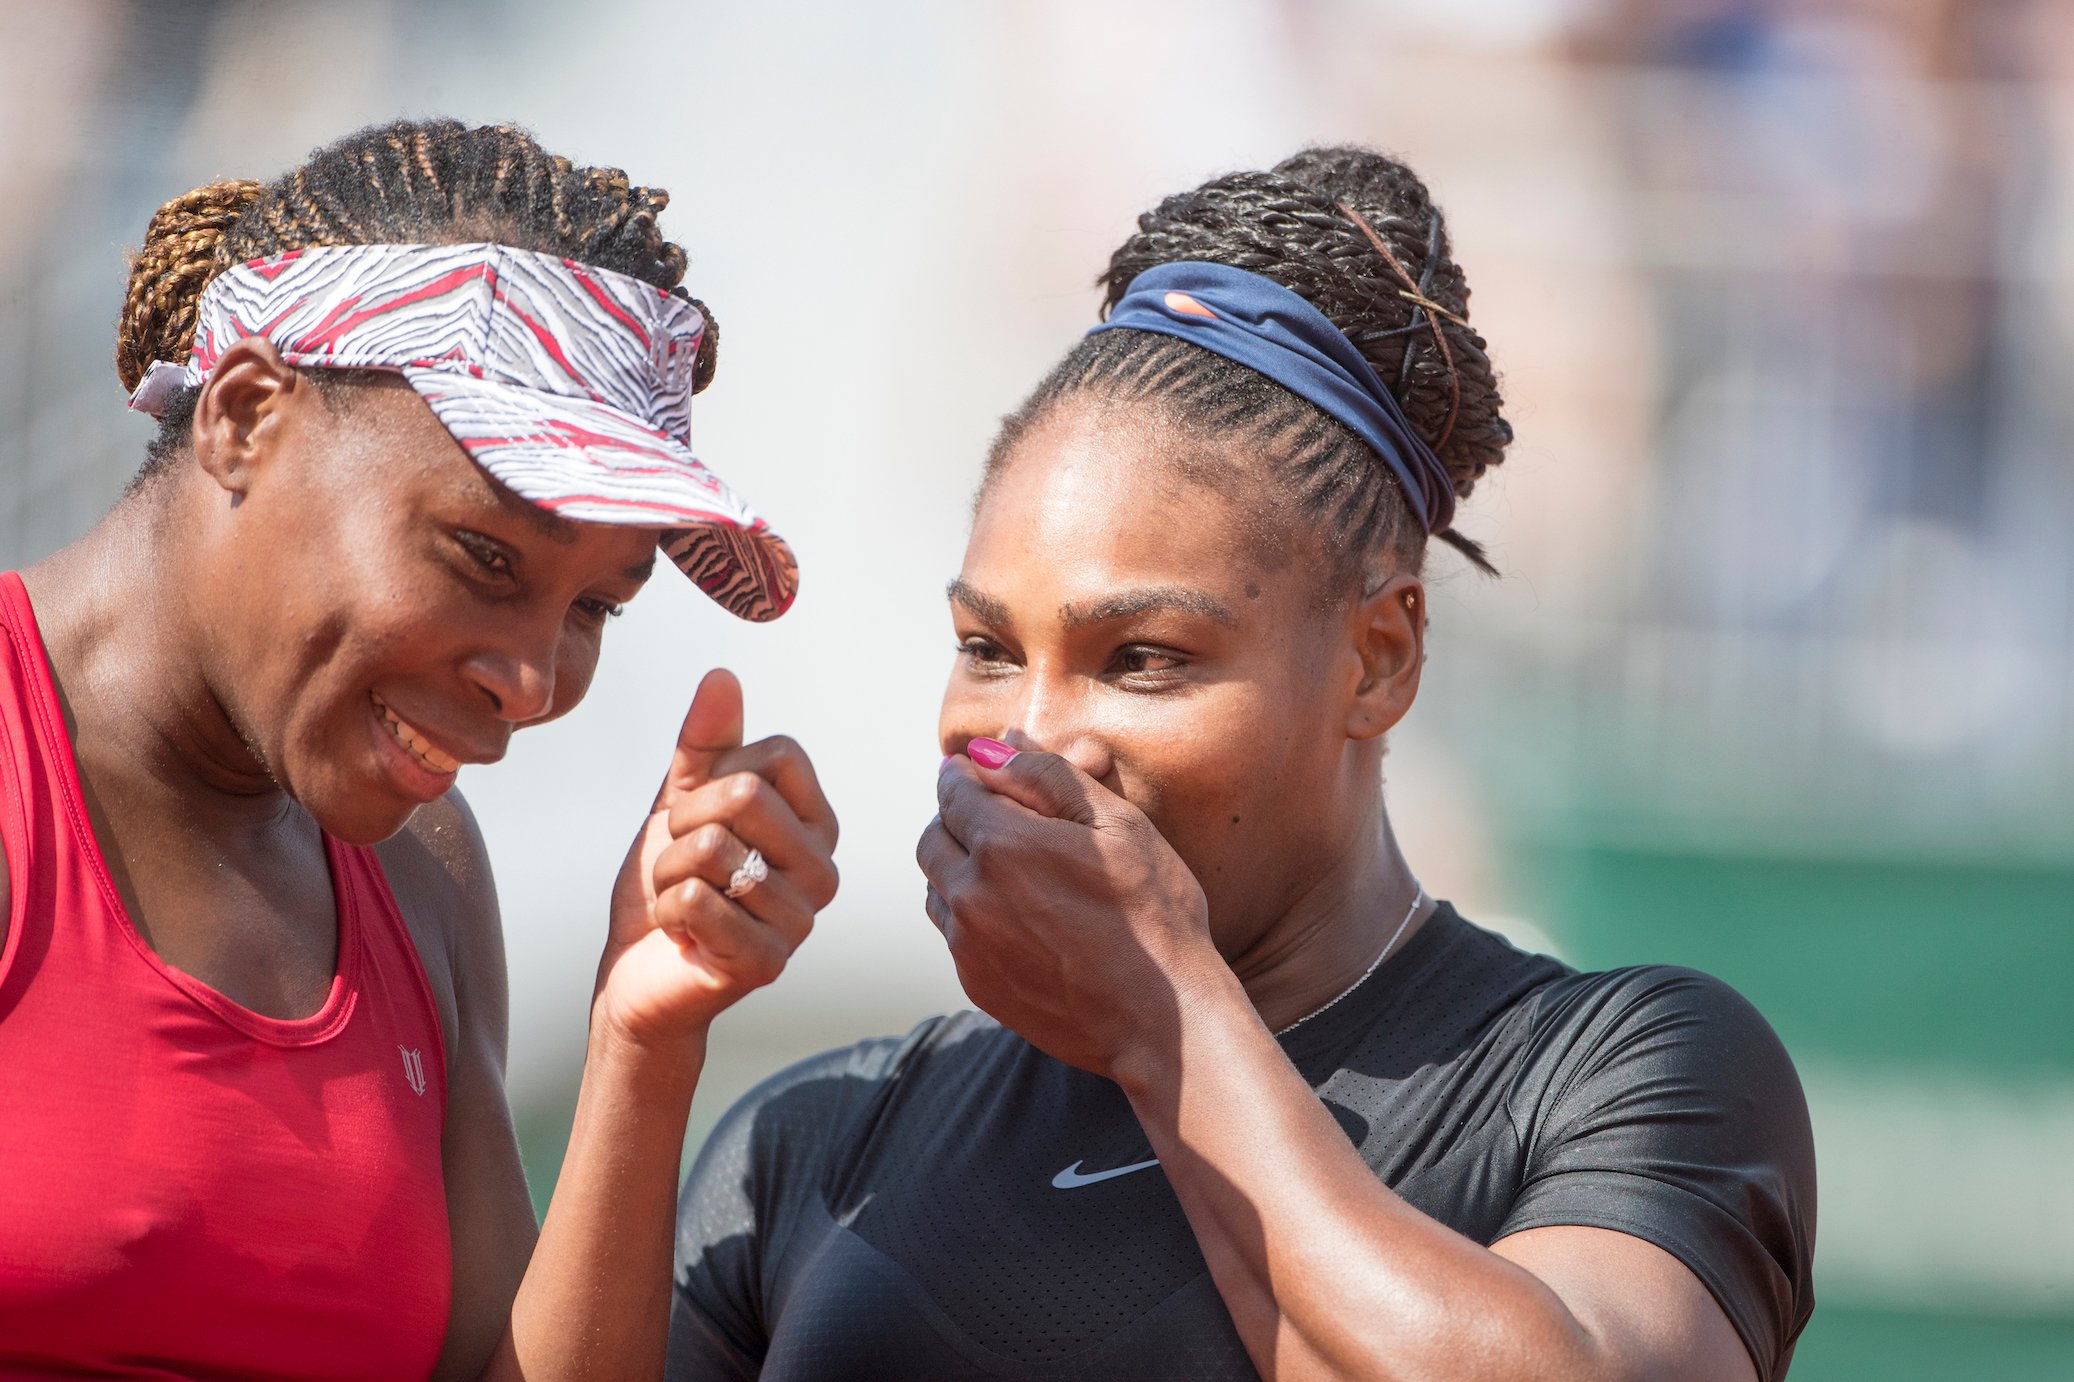 Serena Williams and Venus Williams laughing together on the tennis court